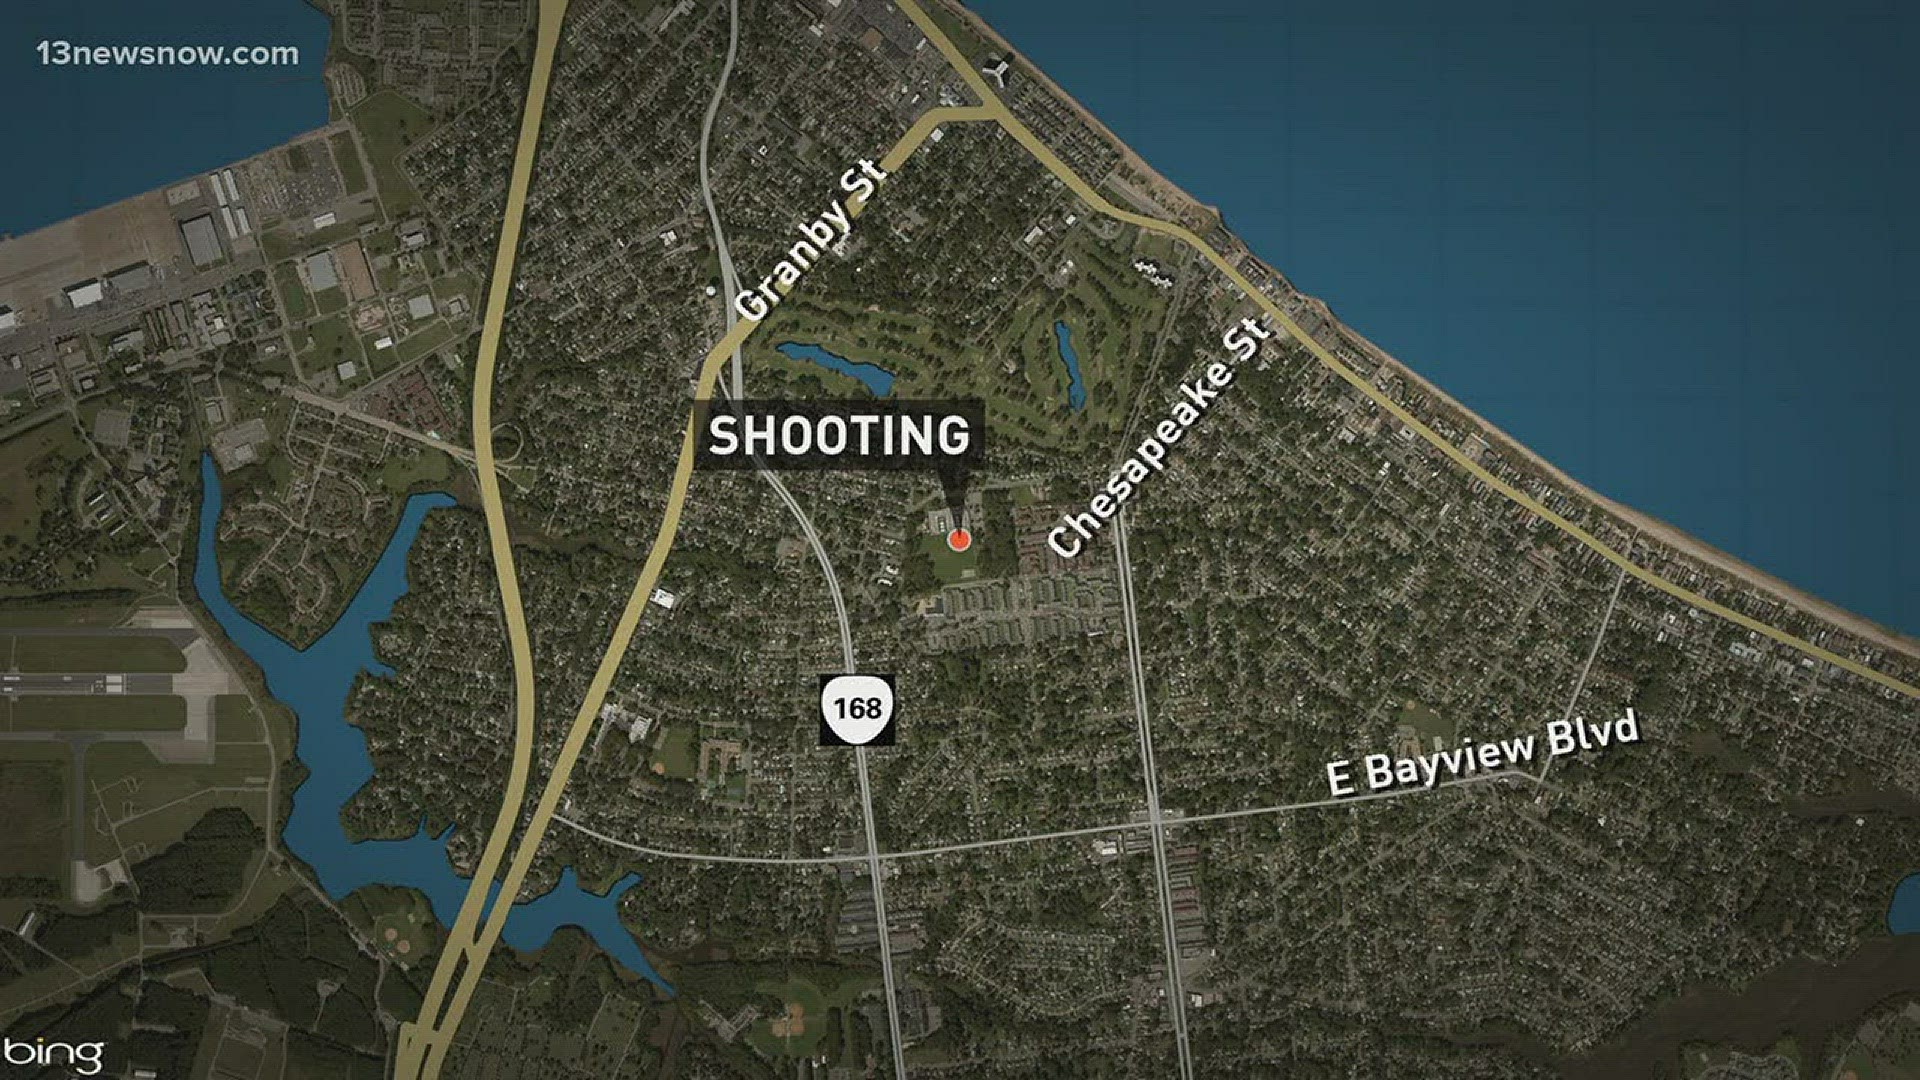 Norfolk police were investigating another shooting in Ocean View.